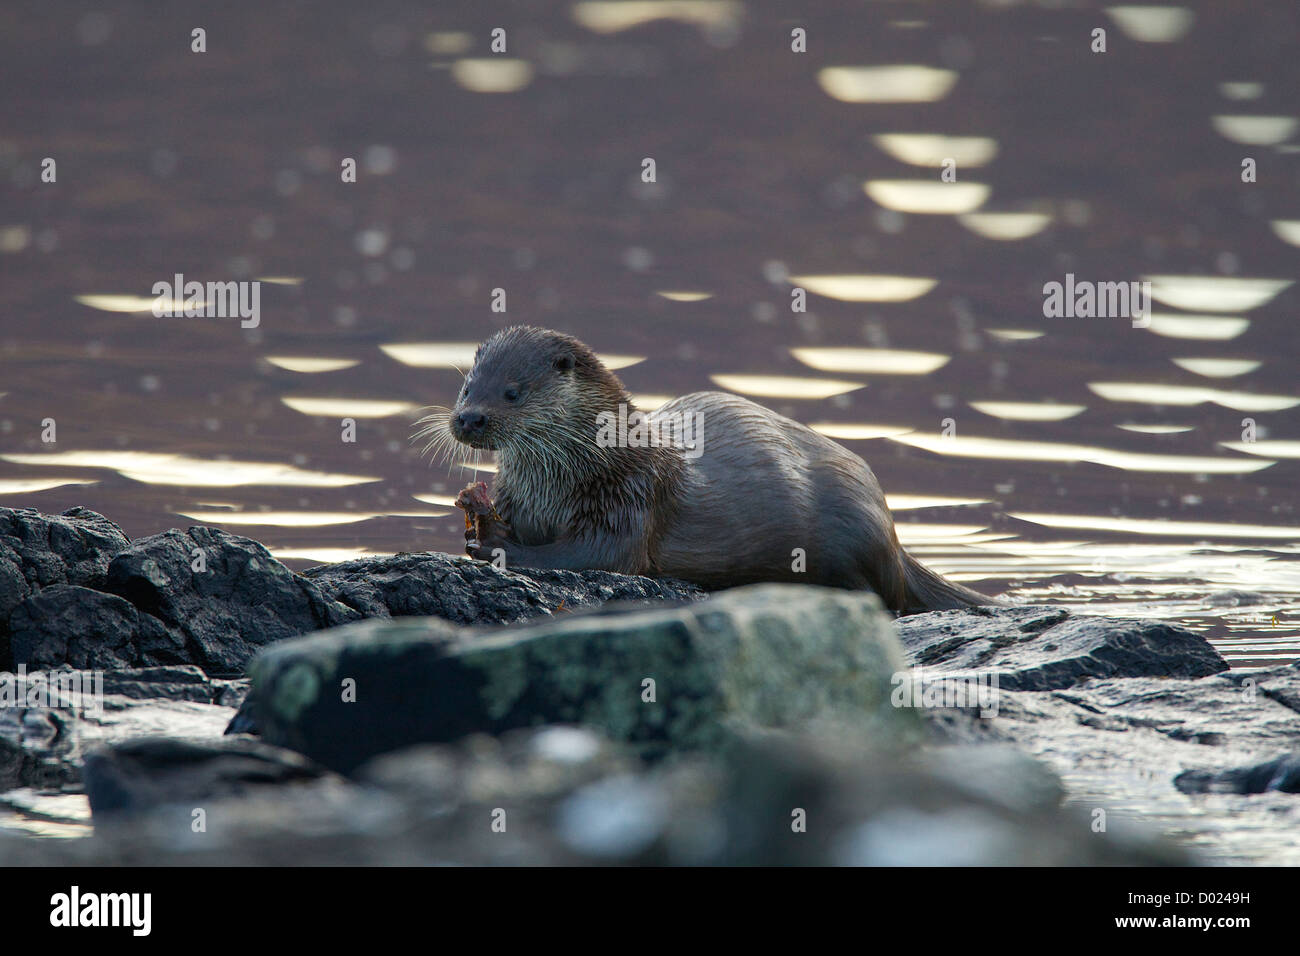 otters from the isle of mull Stock Photo